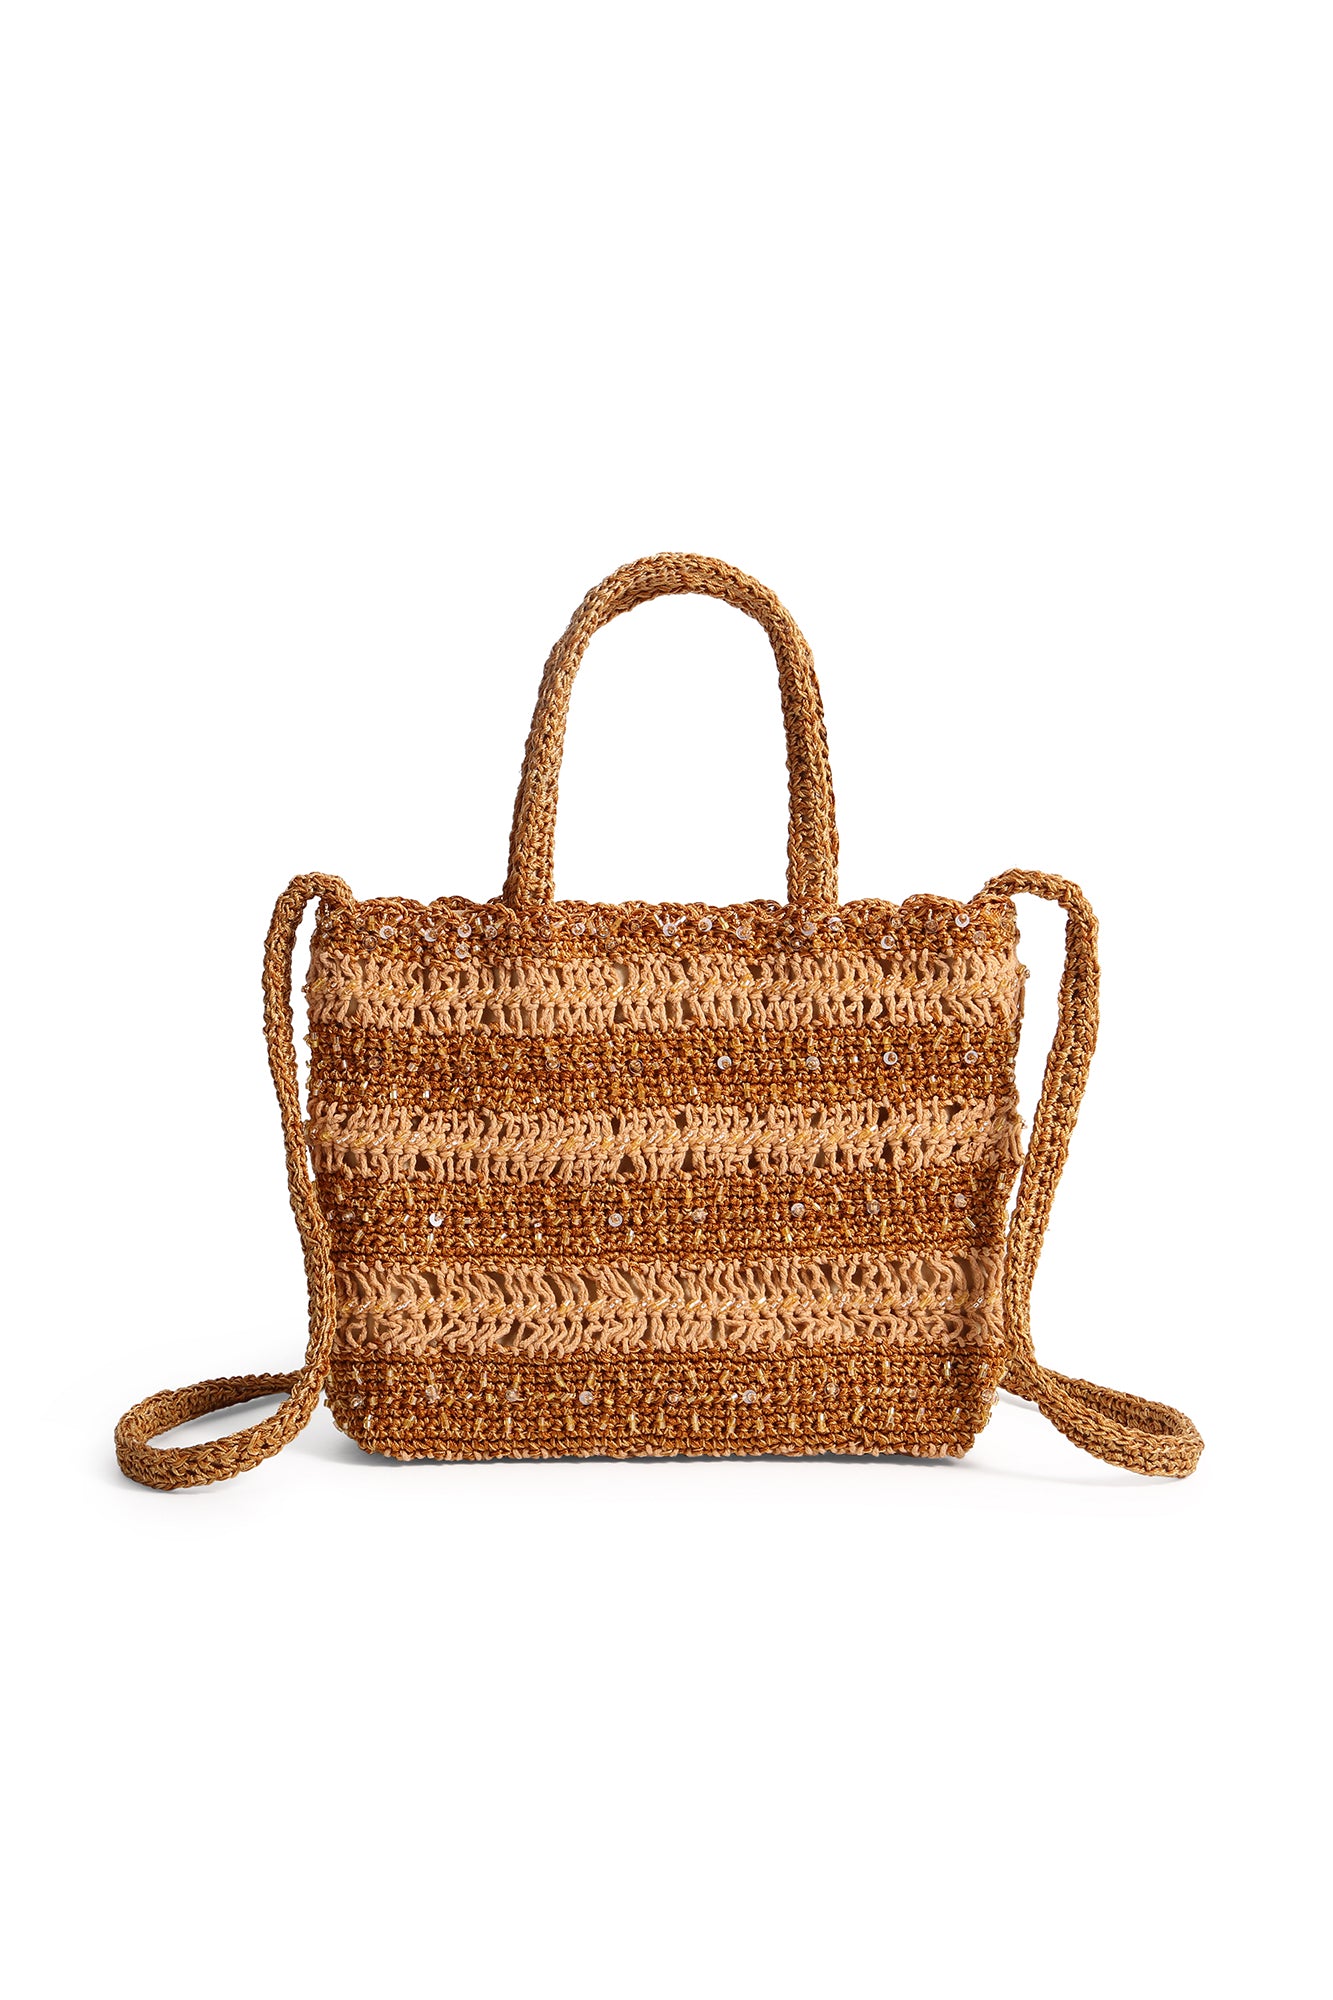 Dusty Rose Small Modern Woven Tote with Unique Handles - Straw Tote | Likha